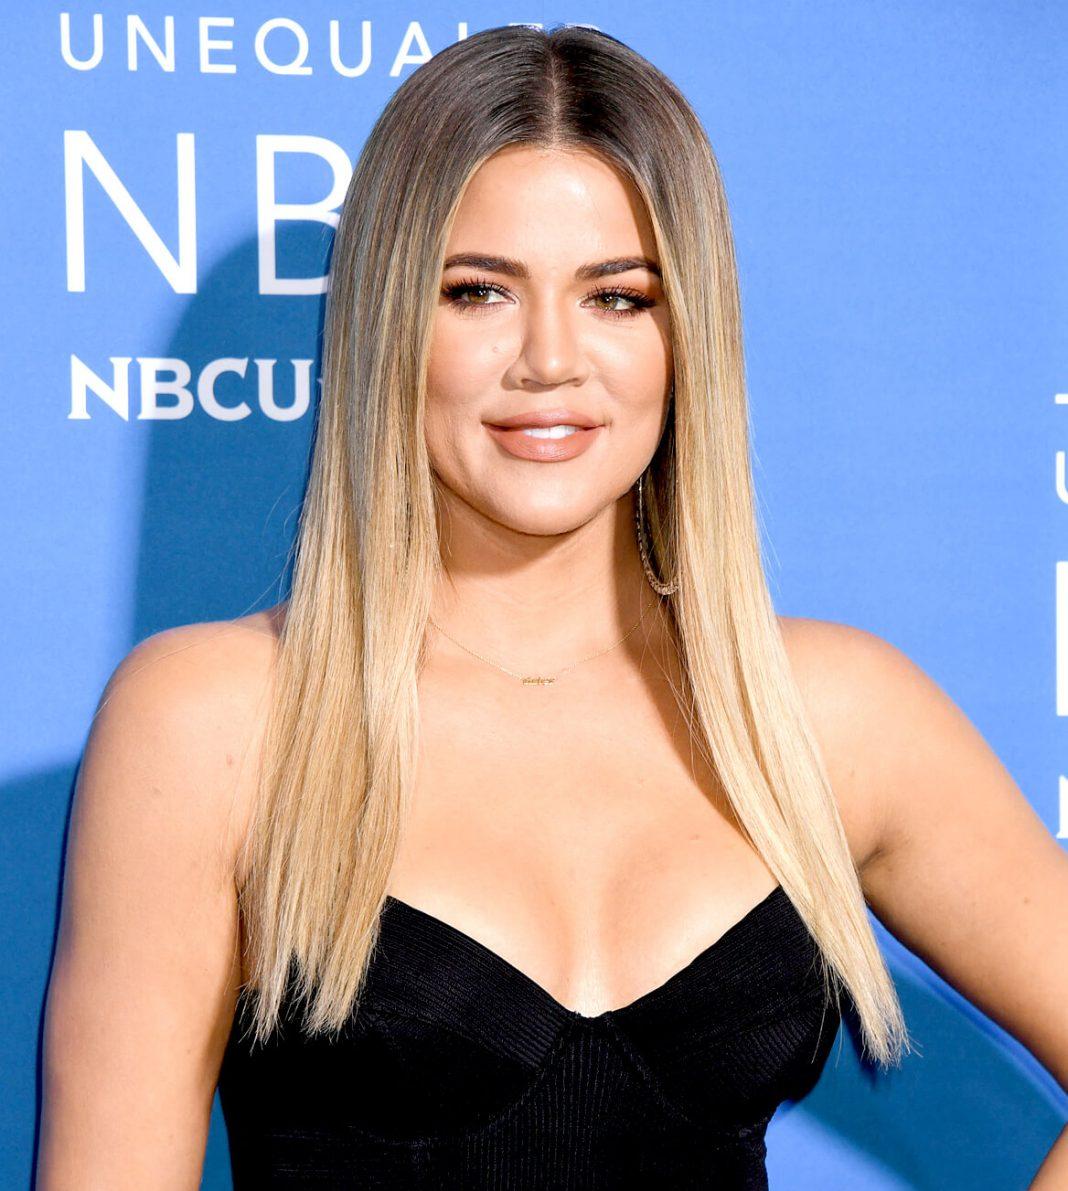 43 Nude Pictures Of Khloé Kardashian Are Incredibly Excellent | Best Of Comic Books